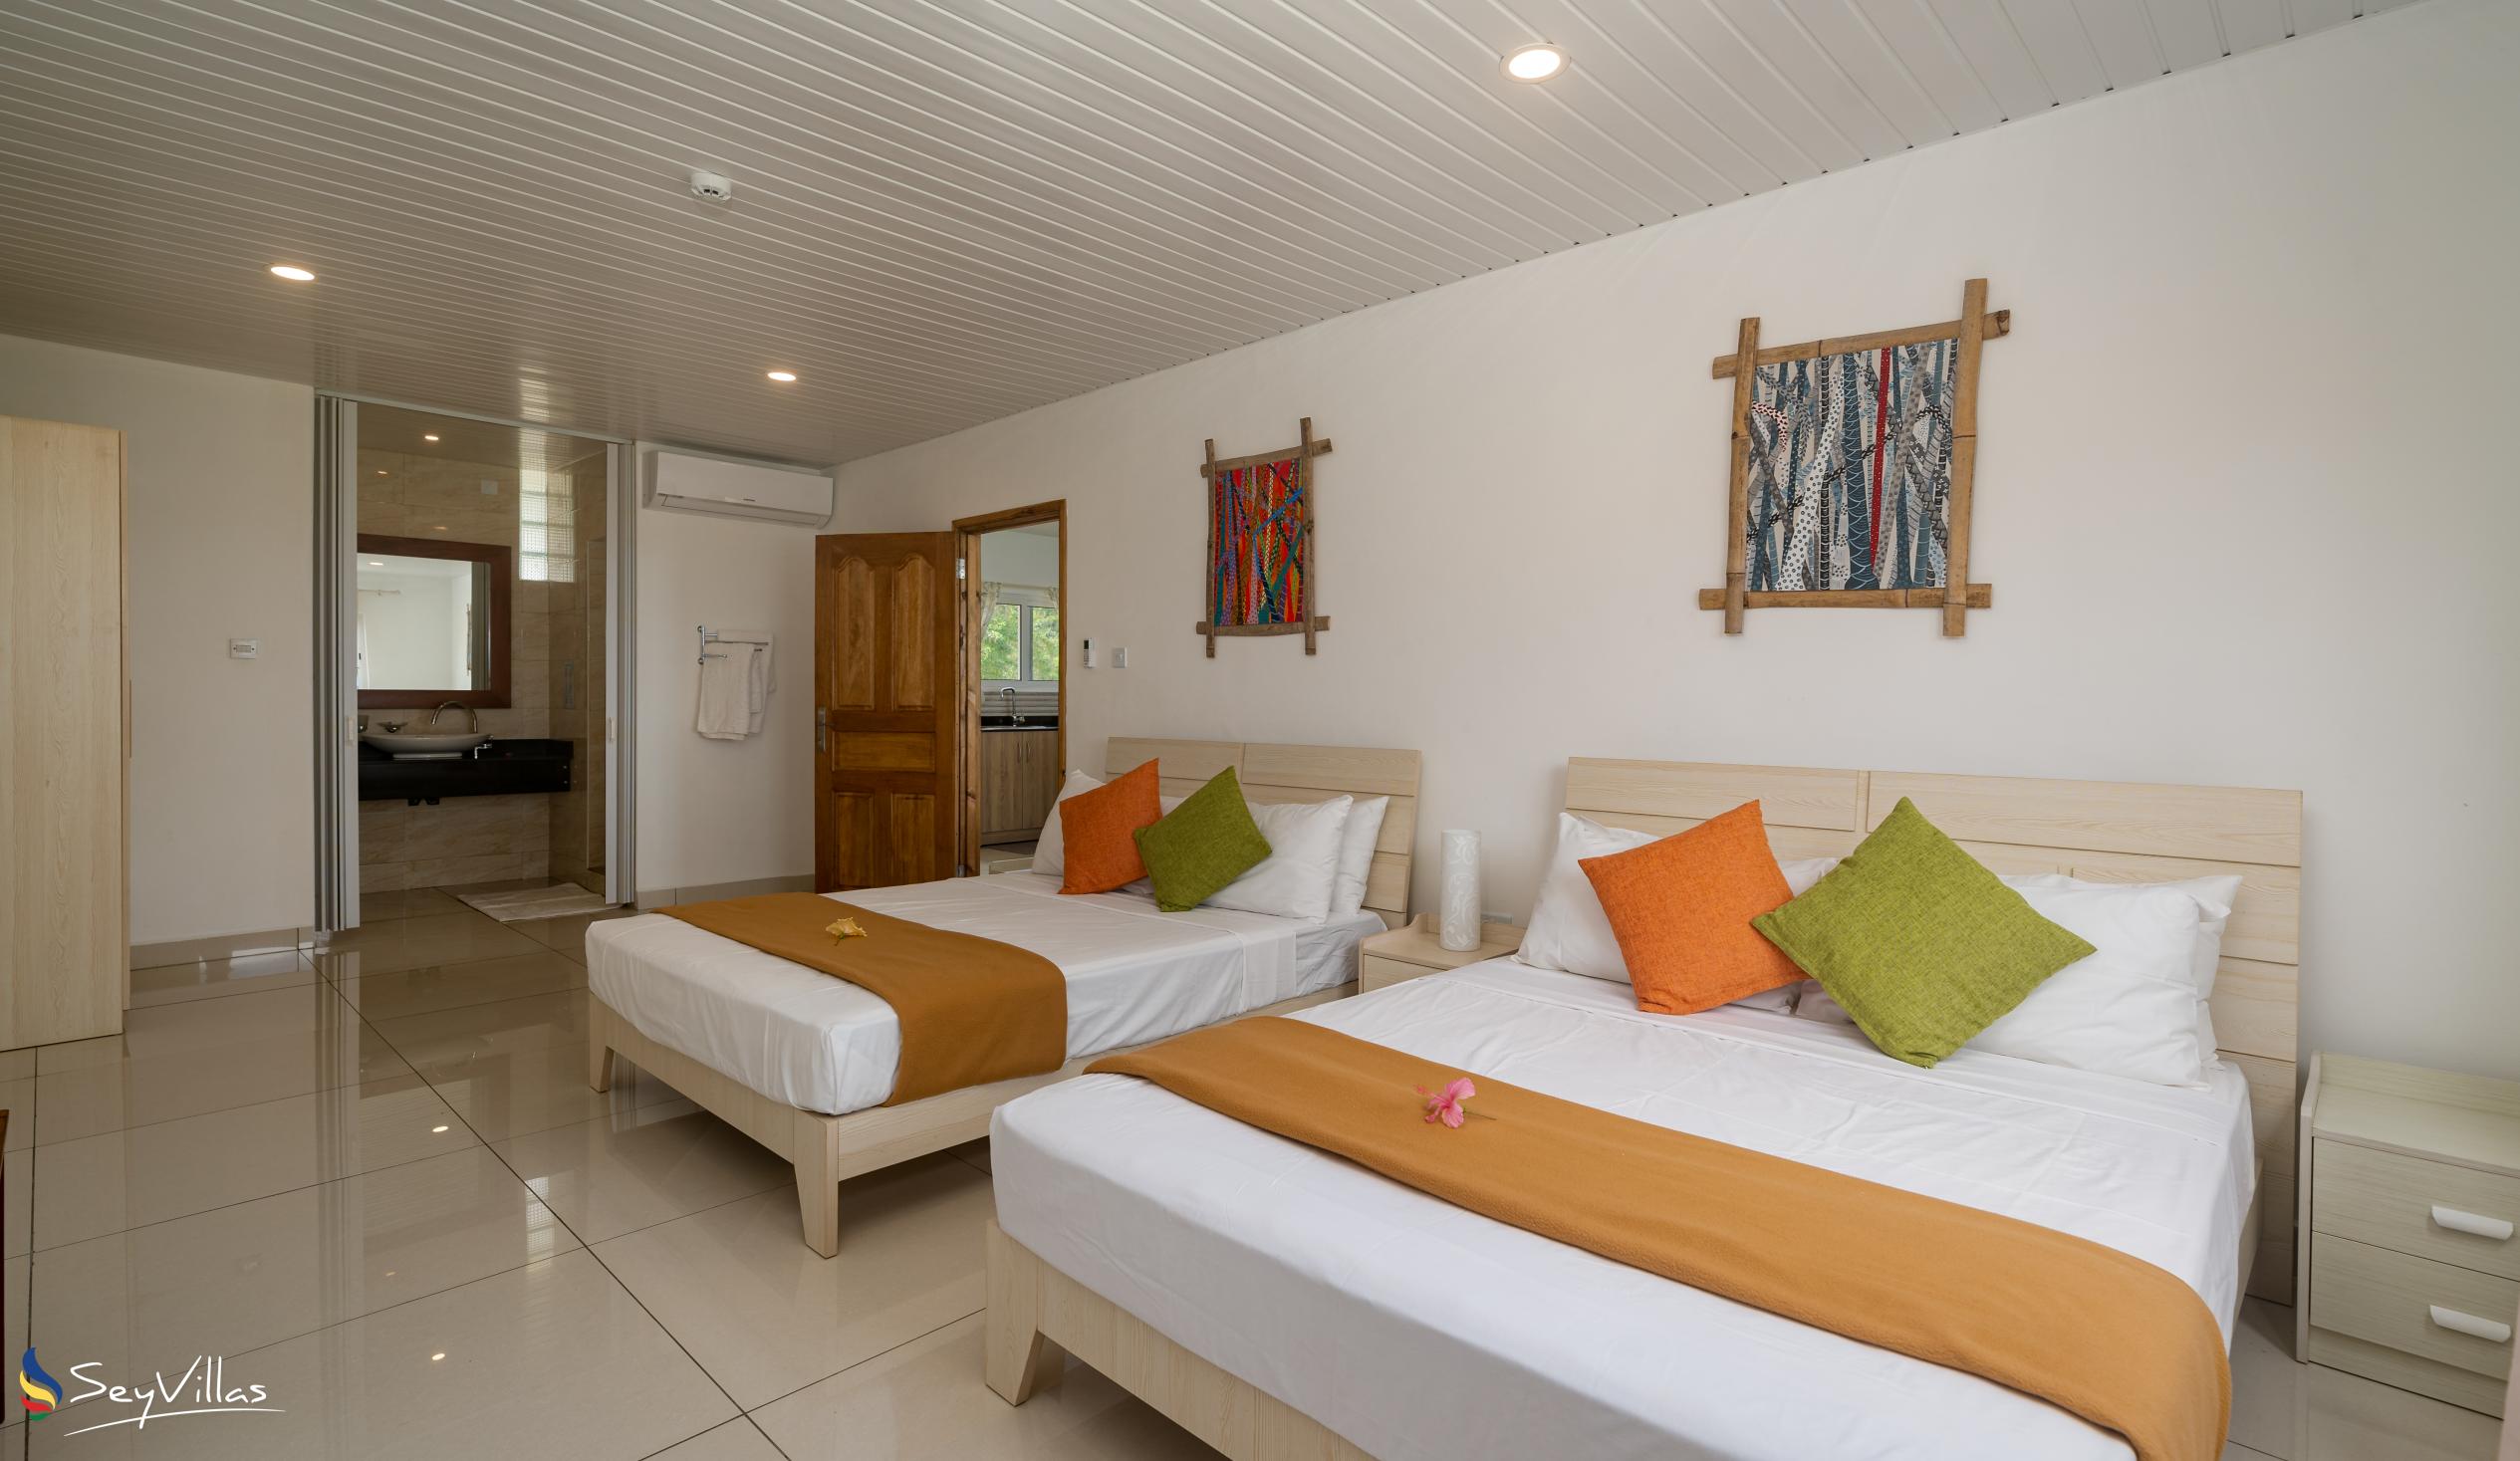 Photo 68: Creole Pearl Self Catering - 2-Bedroom Apartment - Mahé (Seychelles)